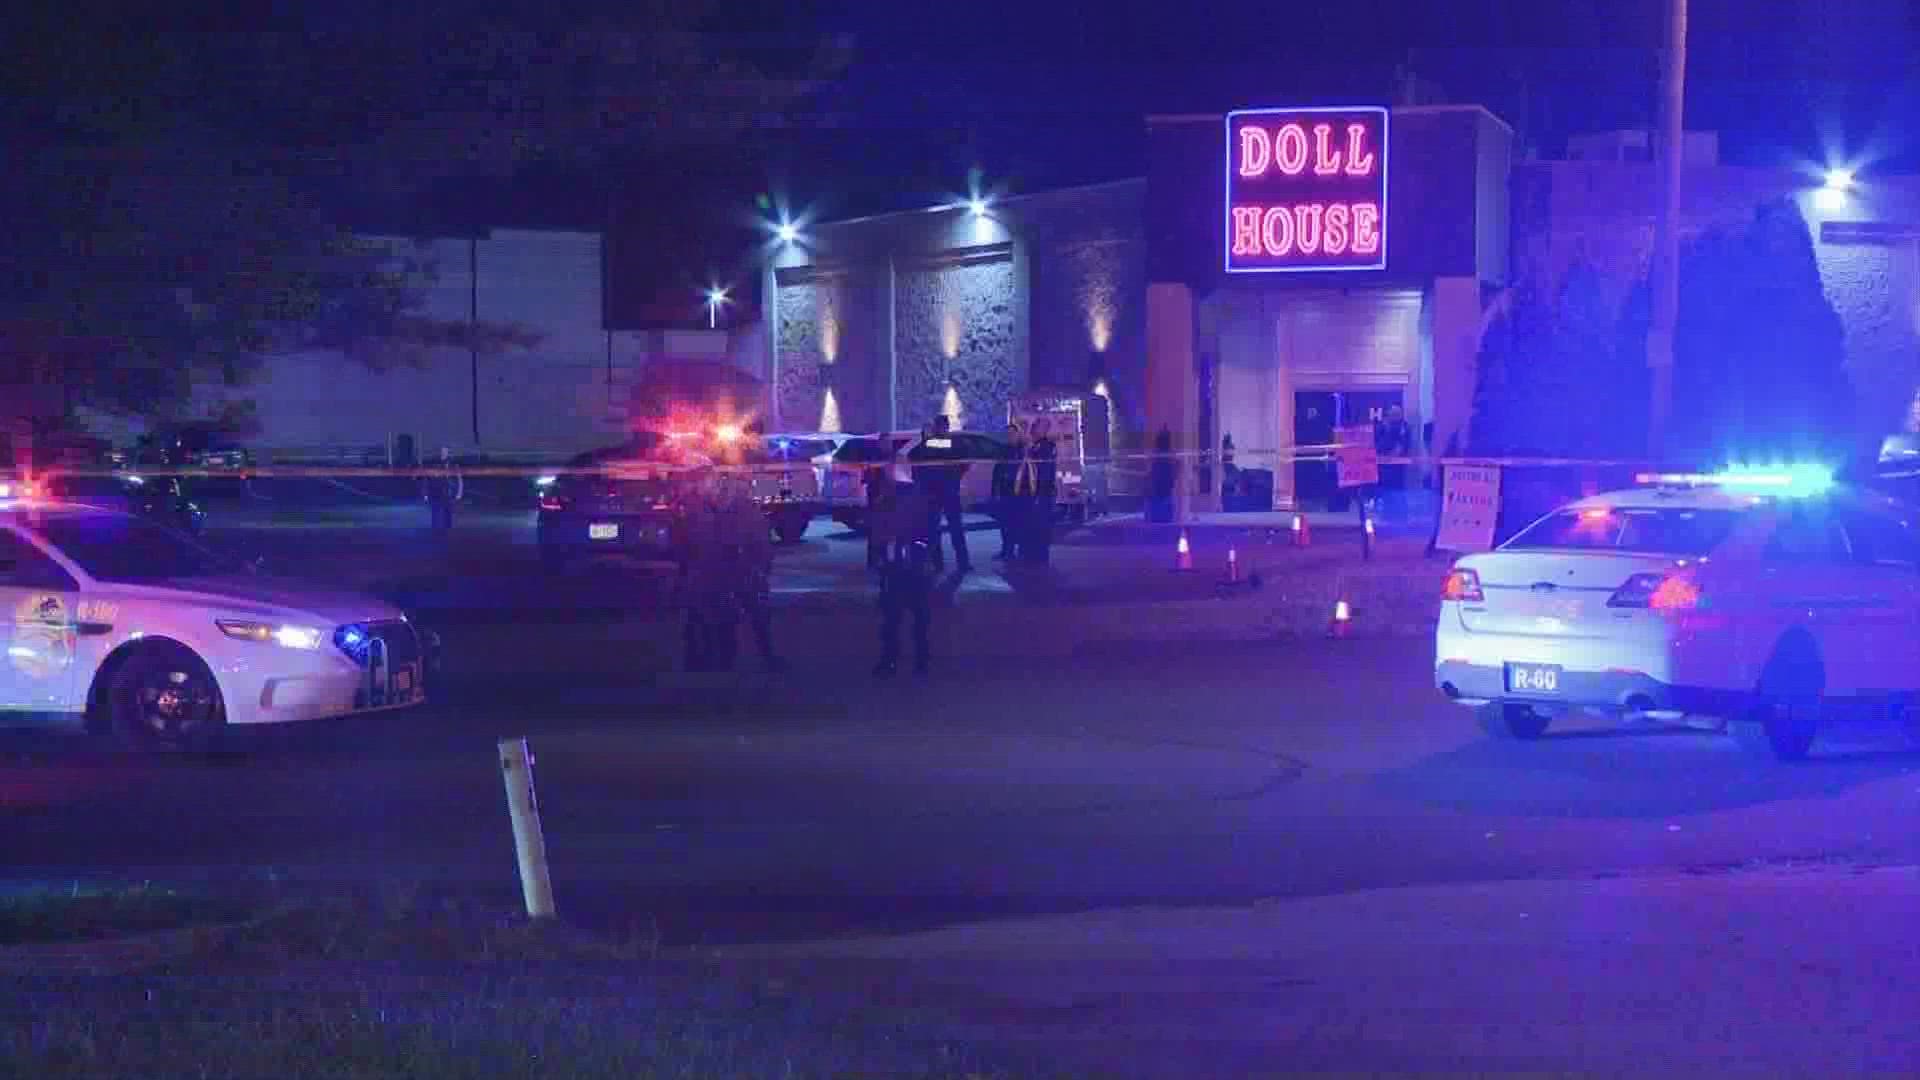 Two people were shot and three others were grazed by bullets in a shooting at a northeast Columbus gentlemen's club early Wednesday morning, police told 10TV.